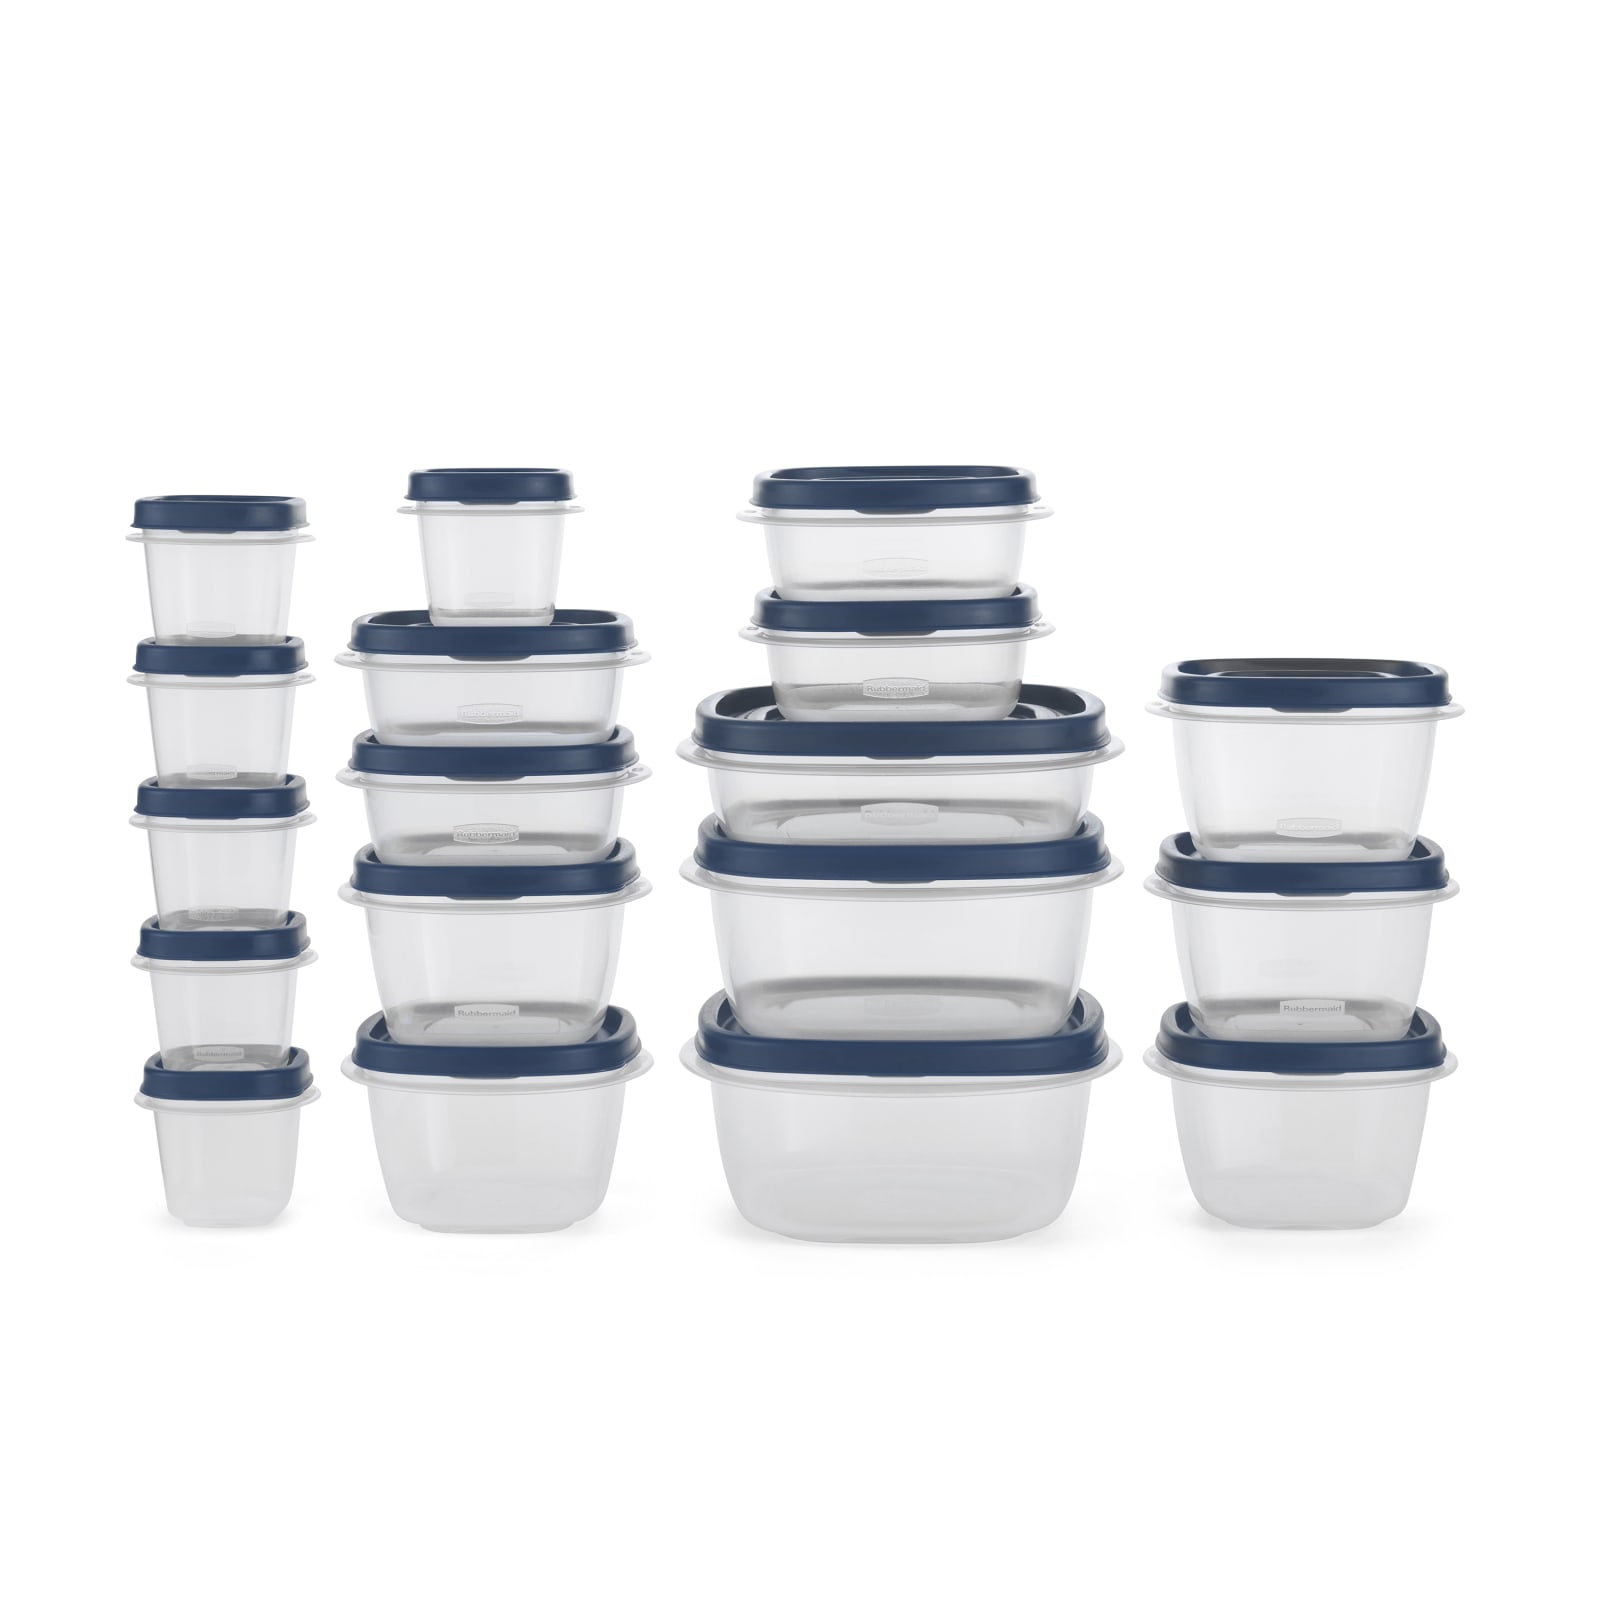 Rubbermaid Easy Find Lids 24-Piece Clear Food Storage Container Set -  Farmers Building Supply